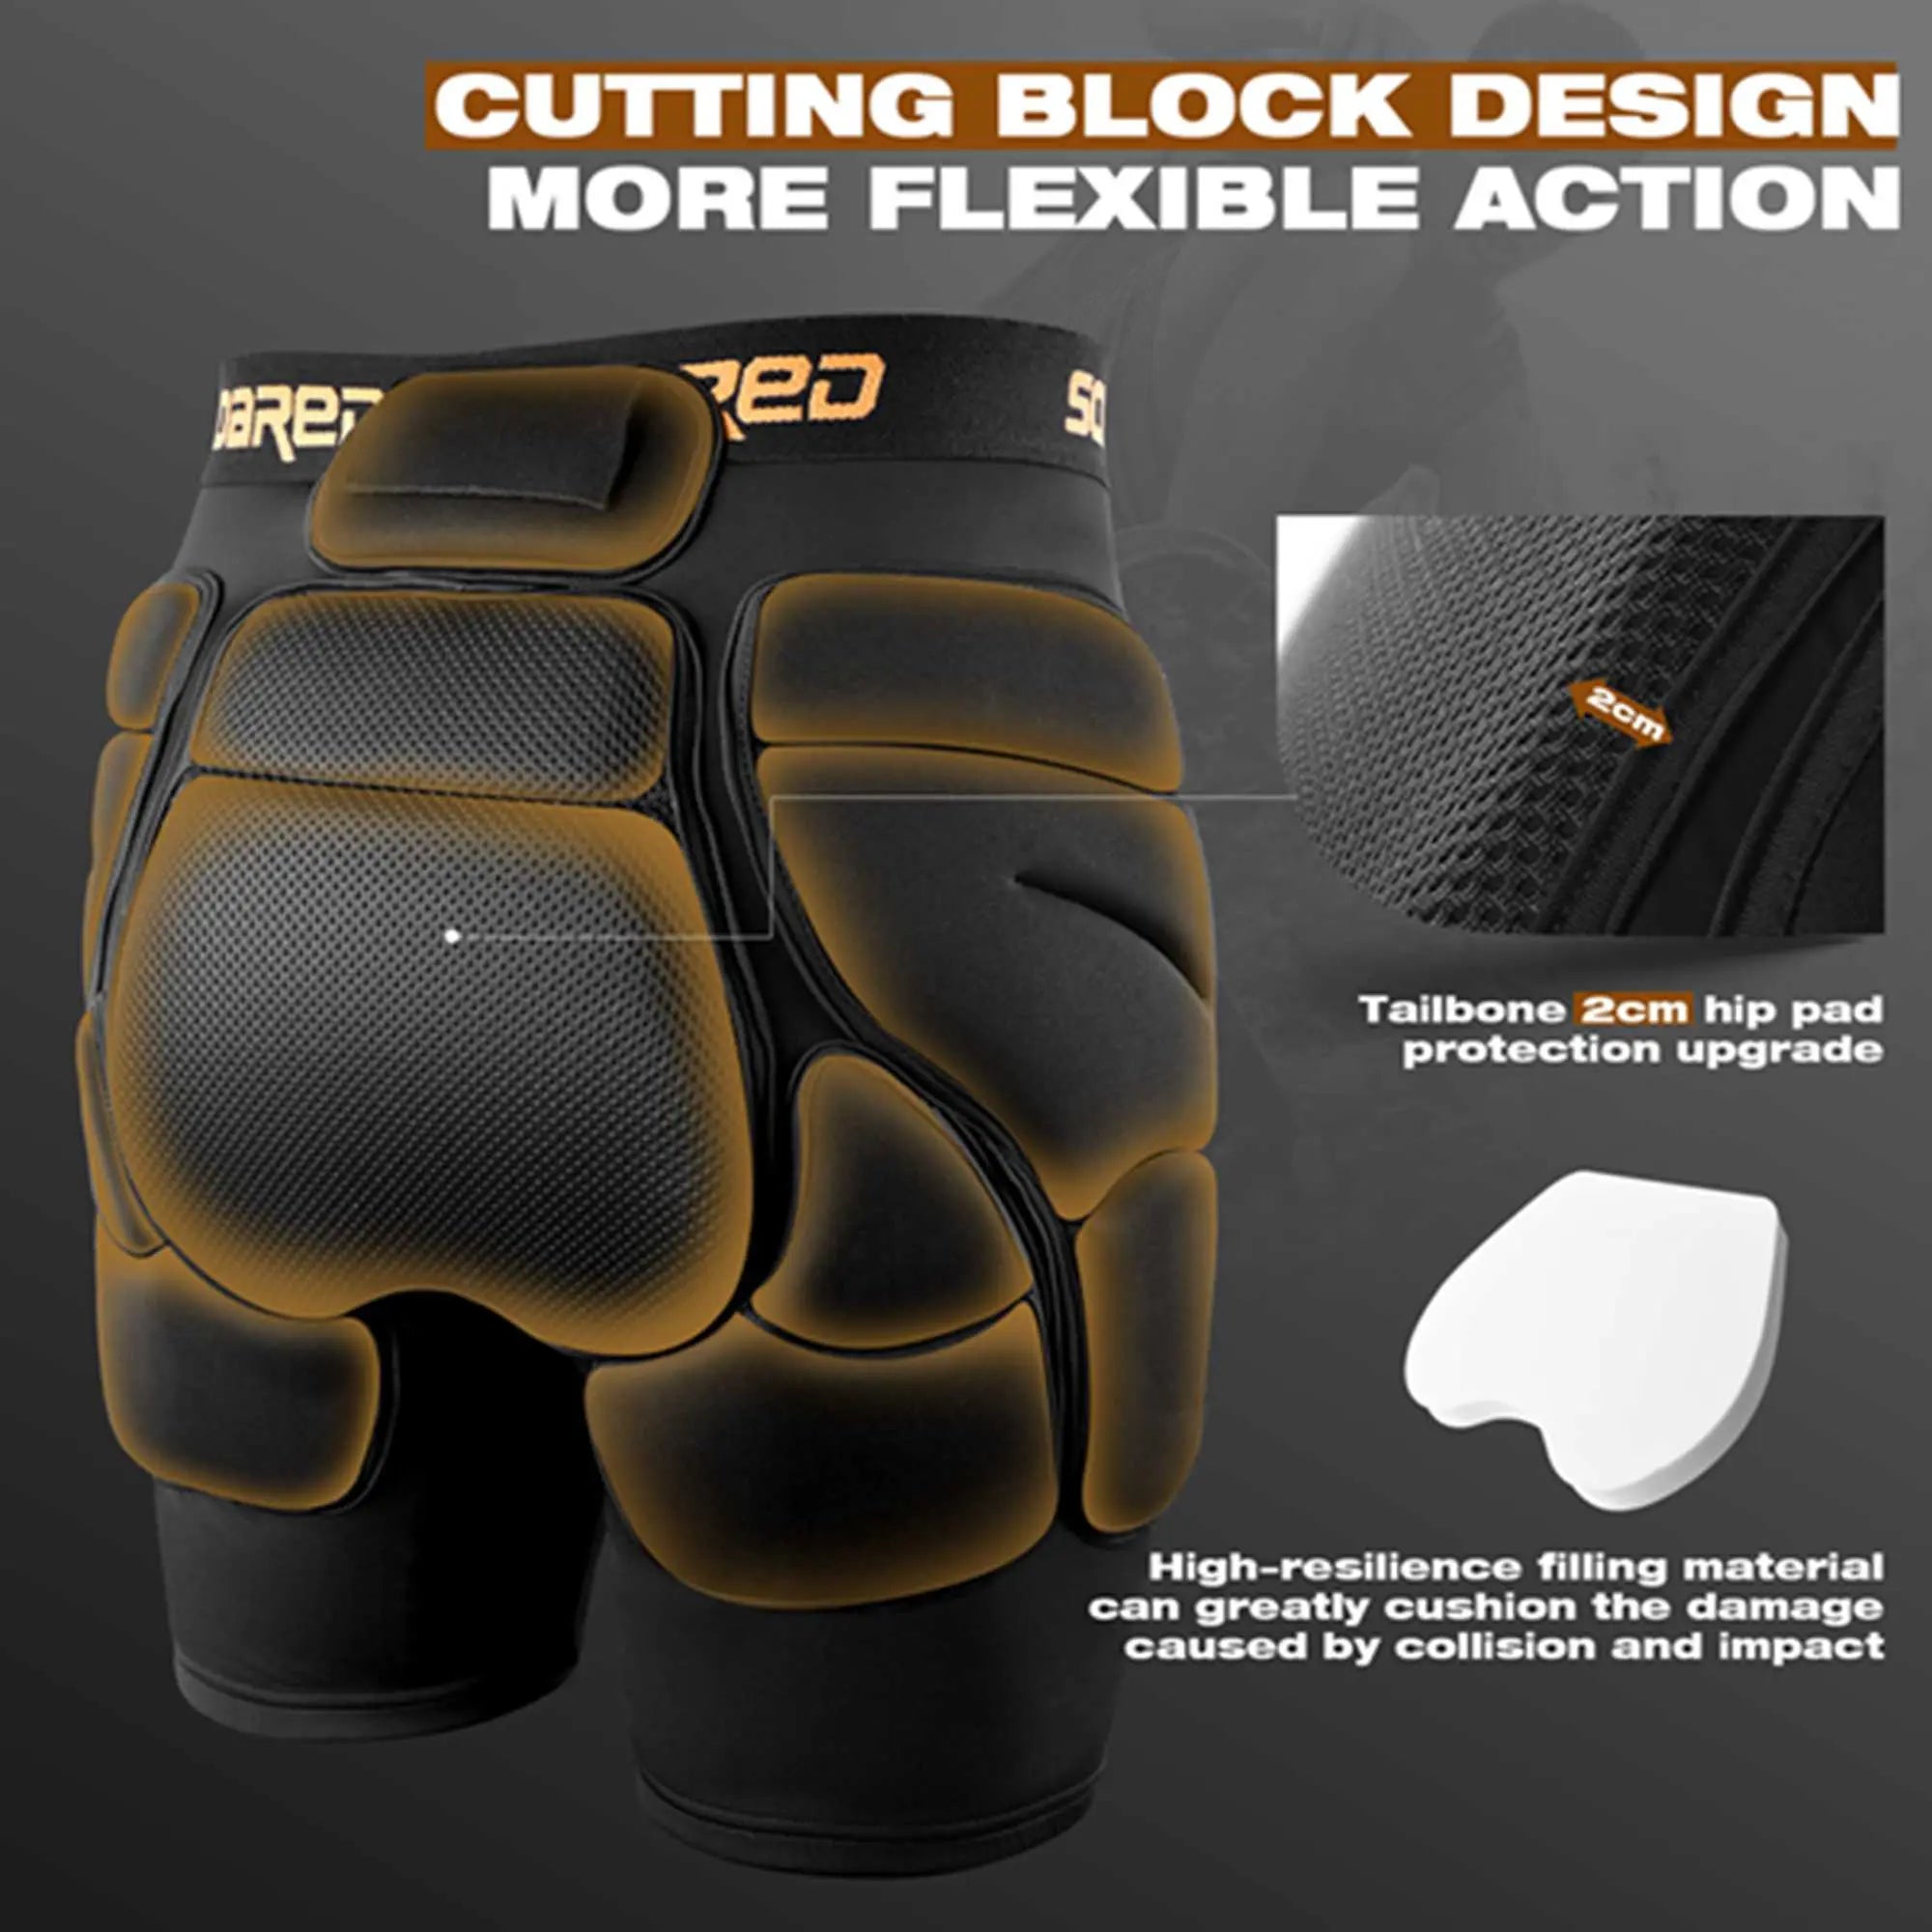 https://cdn.shopify.com/s/files/1/0613/3638/7765/products/Soared-3D-Protection-Hip-Butt-XPE-Padded-Shorts-for-ski_-ice-Skating_-Snowboarding_-Skateboard-for-Men-Women-SOARED-1667960707.jpg?v=1667960711